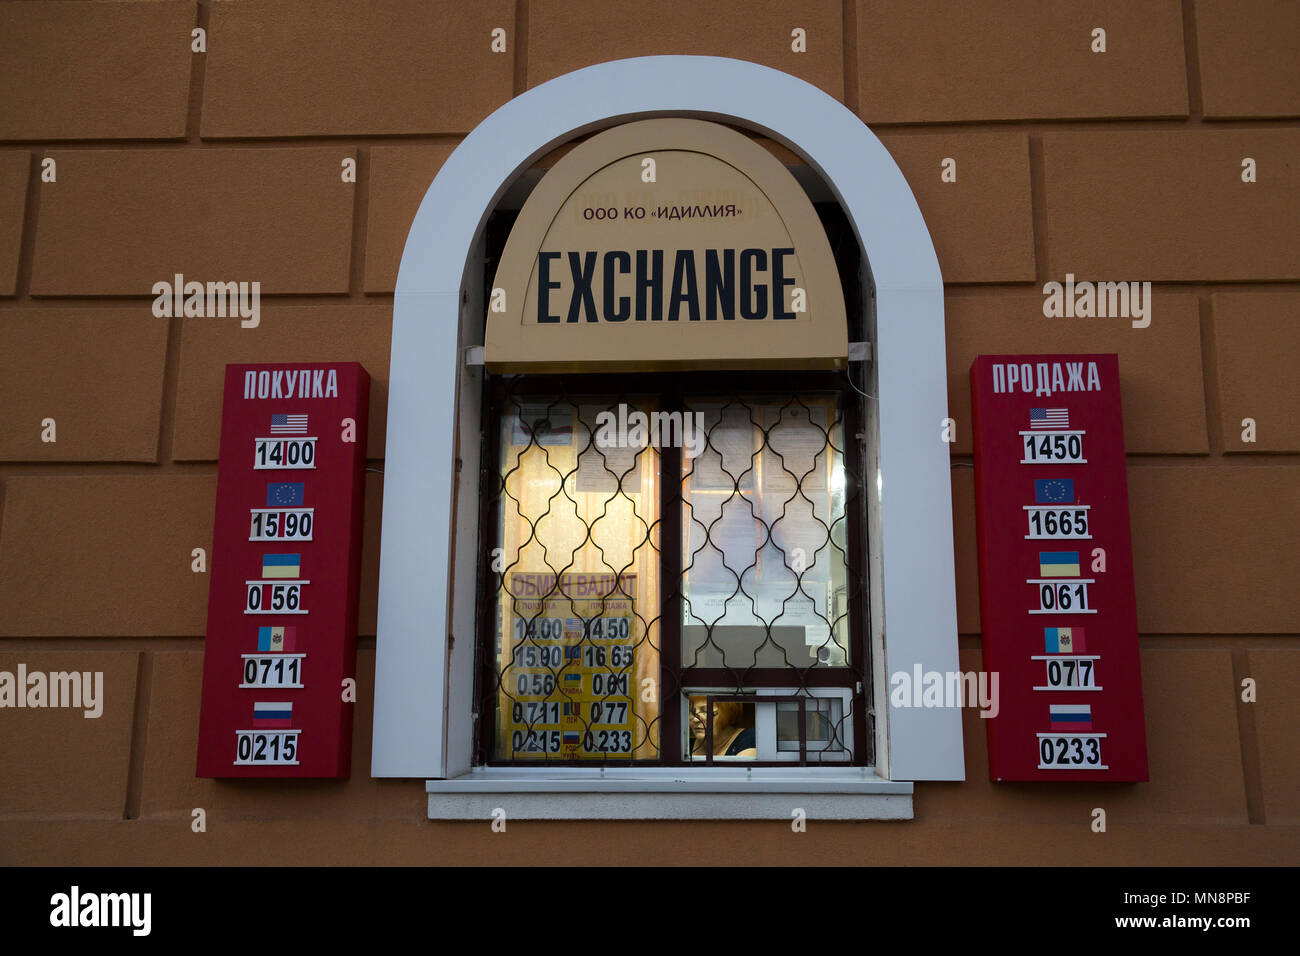 24.08.2016, Moldova, Transnistria, Tiraspol - Exchange office at the Central Station, the official currency is the Transnistrian Ruble (PRB). The Transnistrian ruble is not recognized outside Transnistria, and even in Transnistria itself has only limited convertibility. Transnistria is a repulsive Moldovan republic under Russian influence east of the river Dnister. The region split from Moldova in 1992 and is not recognized by any other country. Even the Russian-dependent entity is known as the Transdnestrovian Moldavian Republic (Pridnestrovkaja Moldavskaja Respublika / PMR). Tiraspol is the  Stock Photo